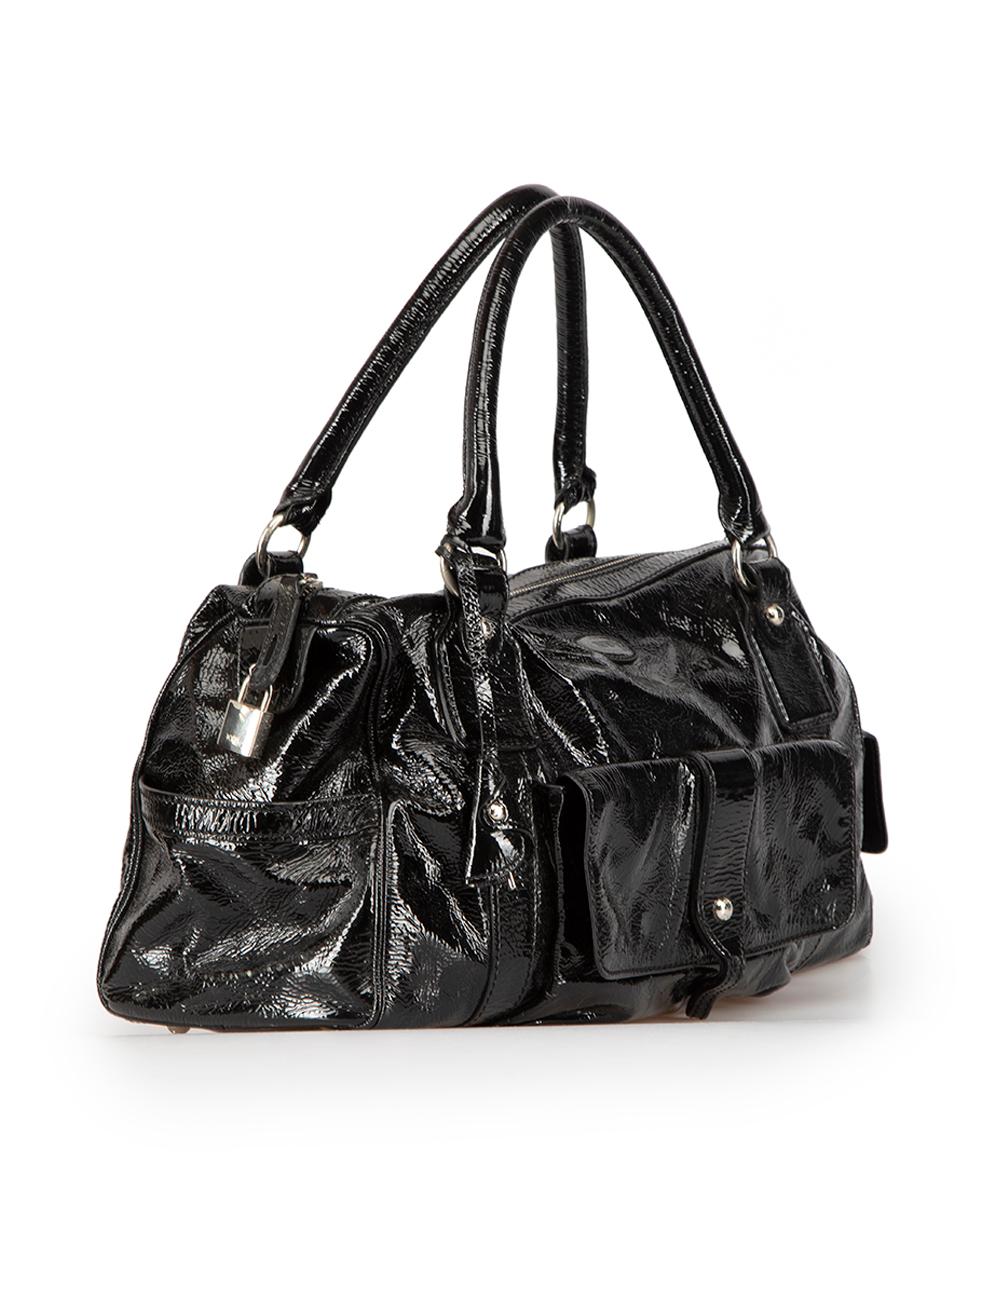 CONDITION is Very good. Minimal wear to handbag is evident. Minimal discolouration to inner lining and minor sticky residue to outer leather on this used Tod's designer resale item. This bag comes with the original dustbag.
 
Details
Black
Patent